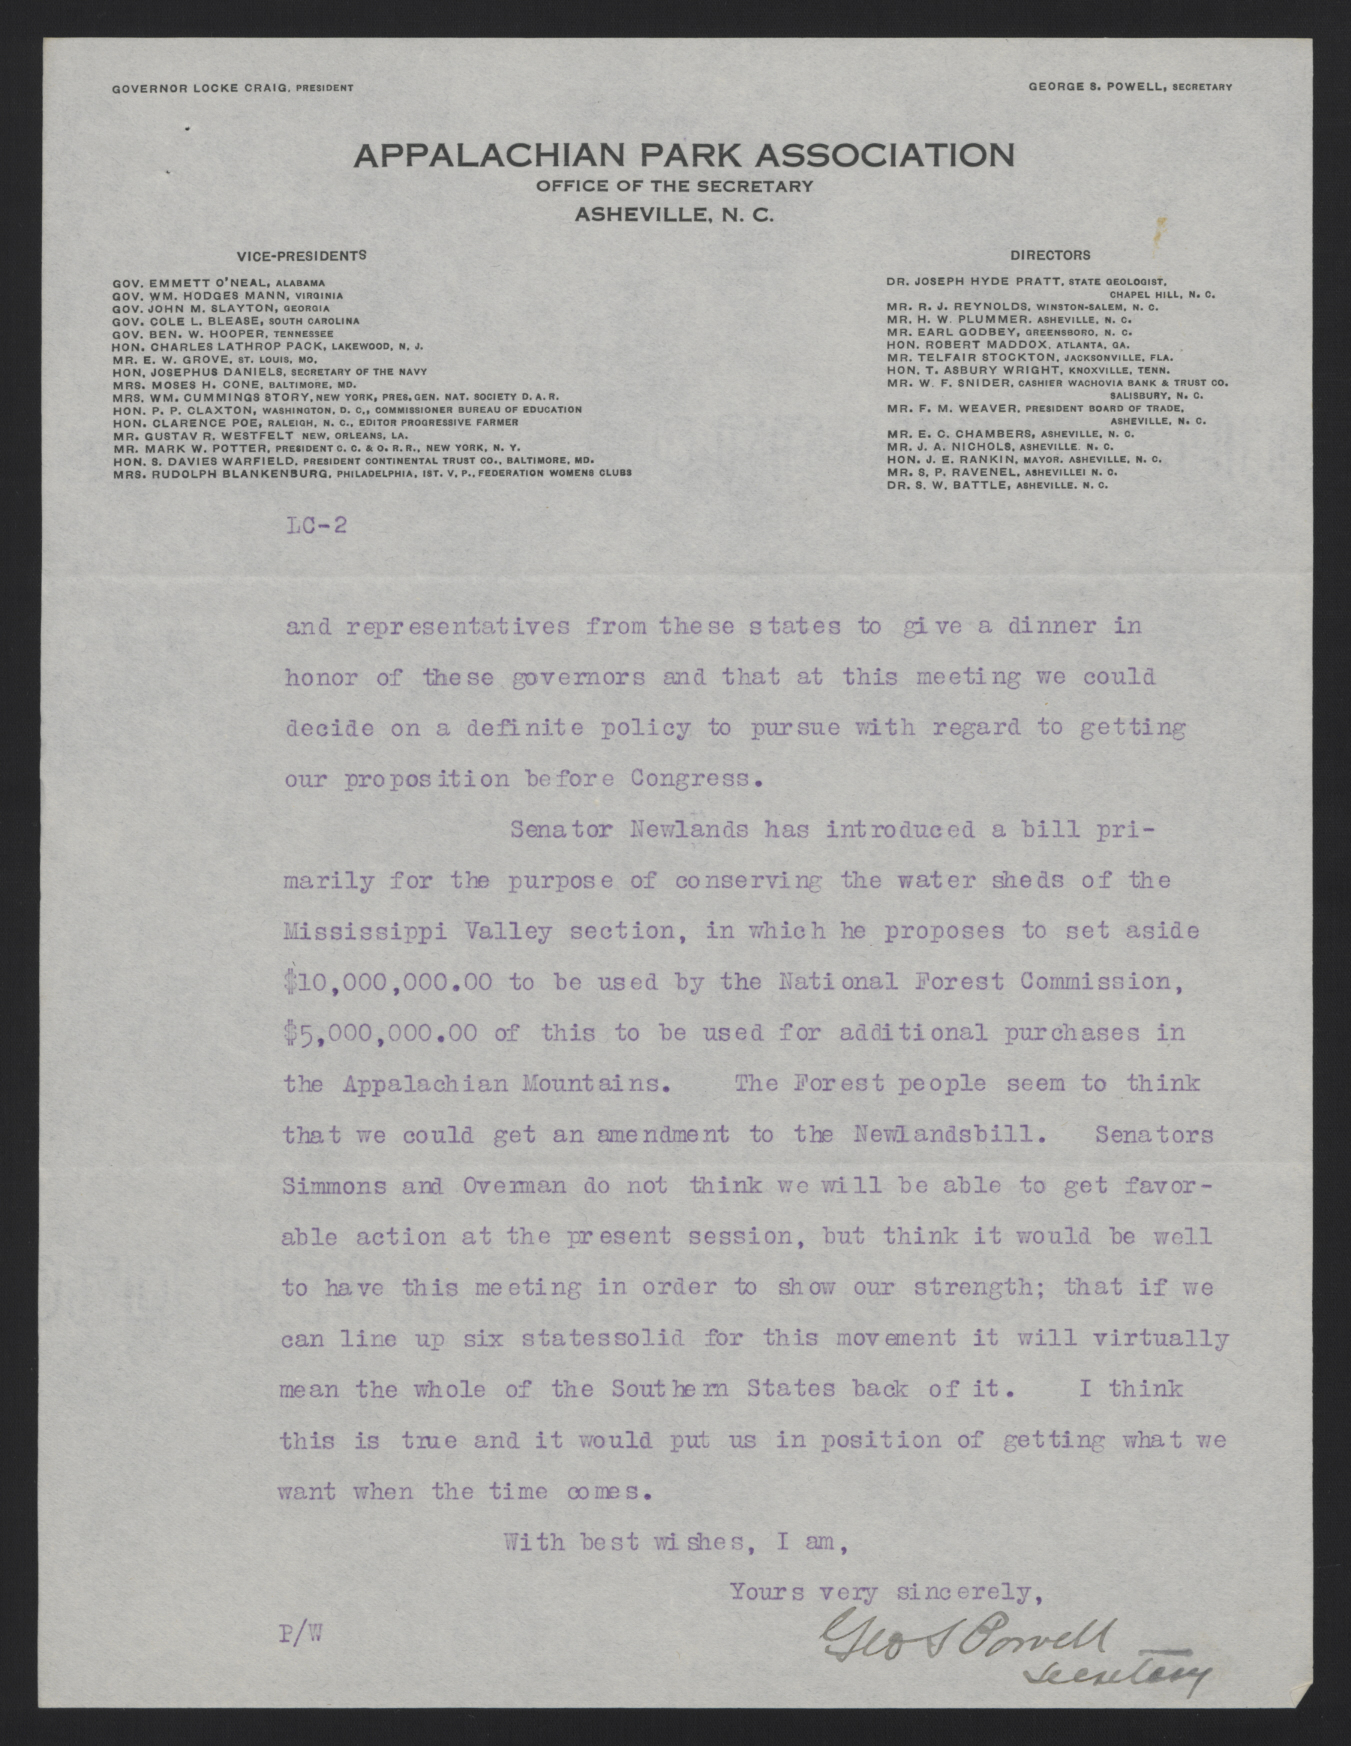 Letter from Powell to Craig, April 6, 1914, page 2